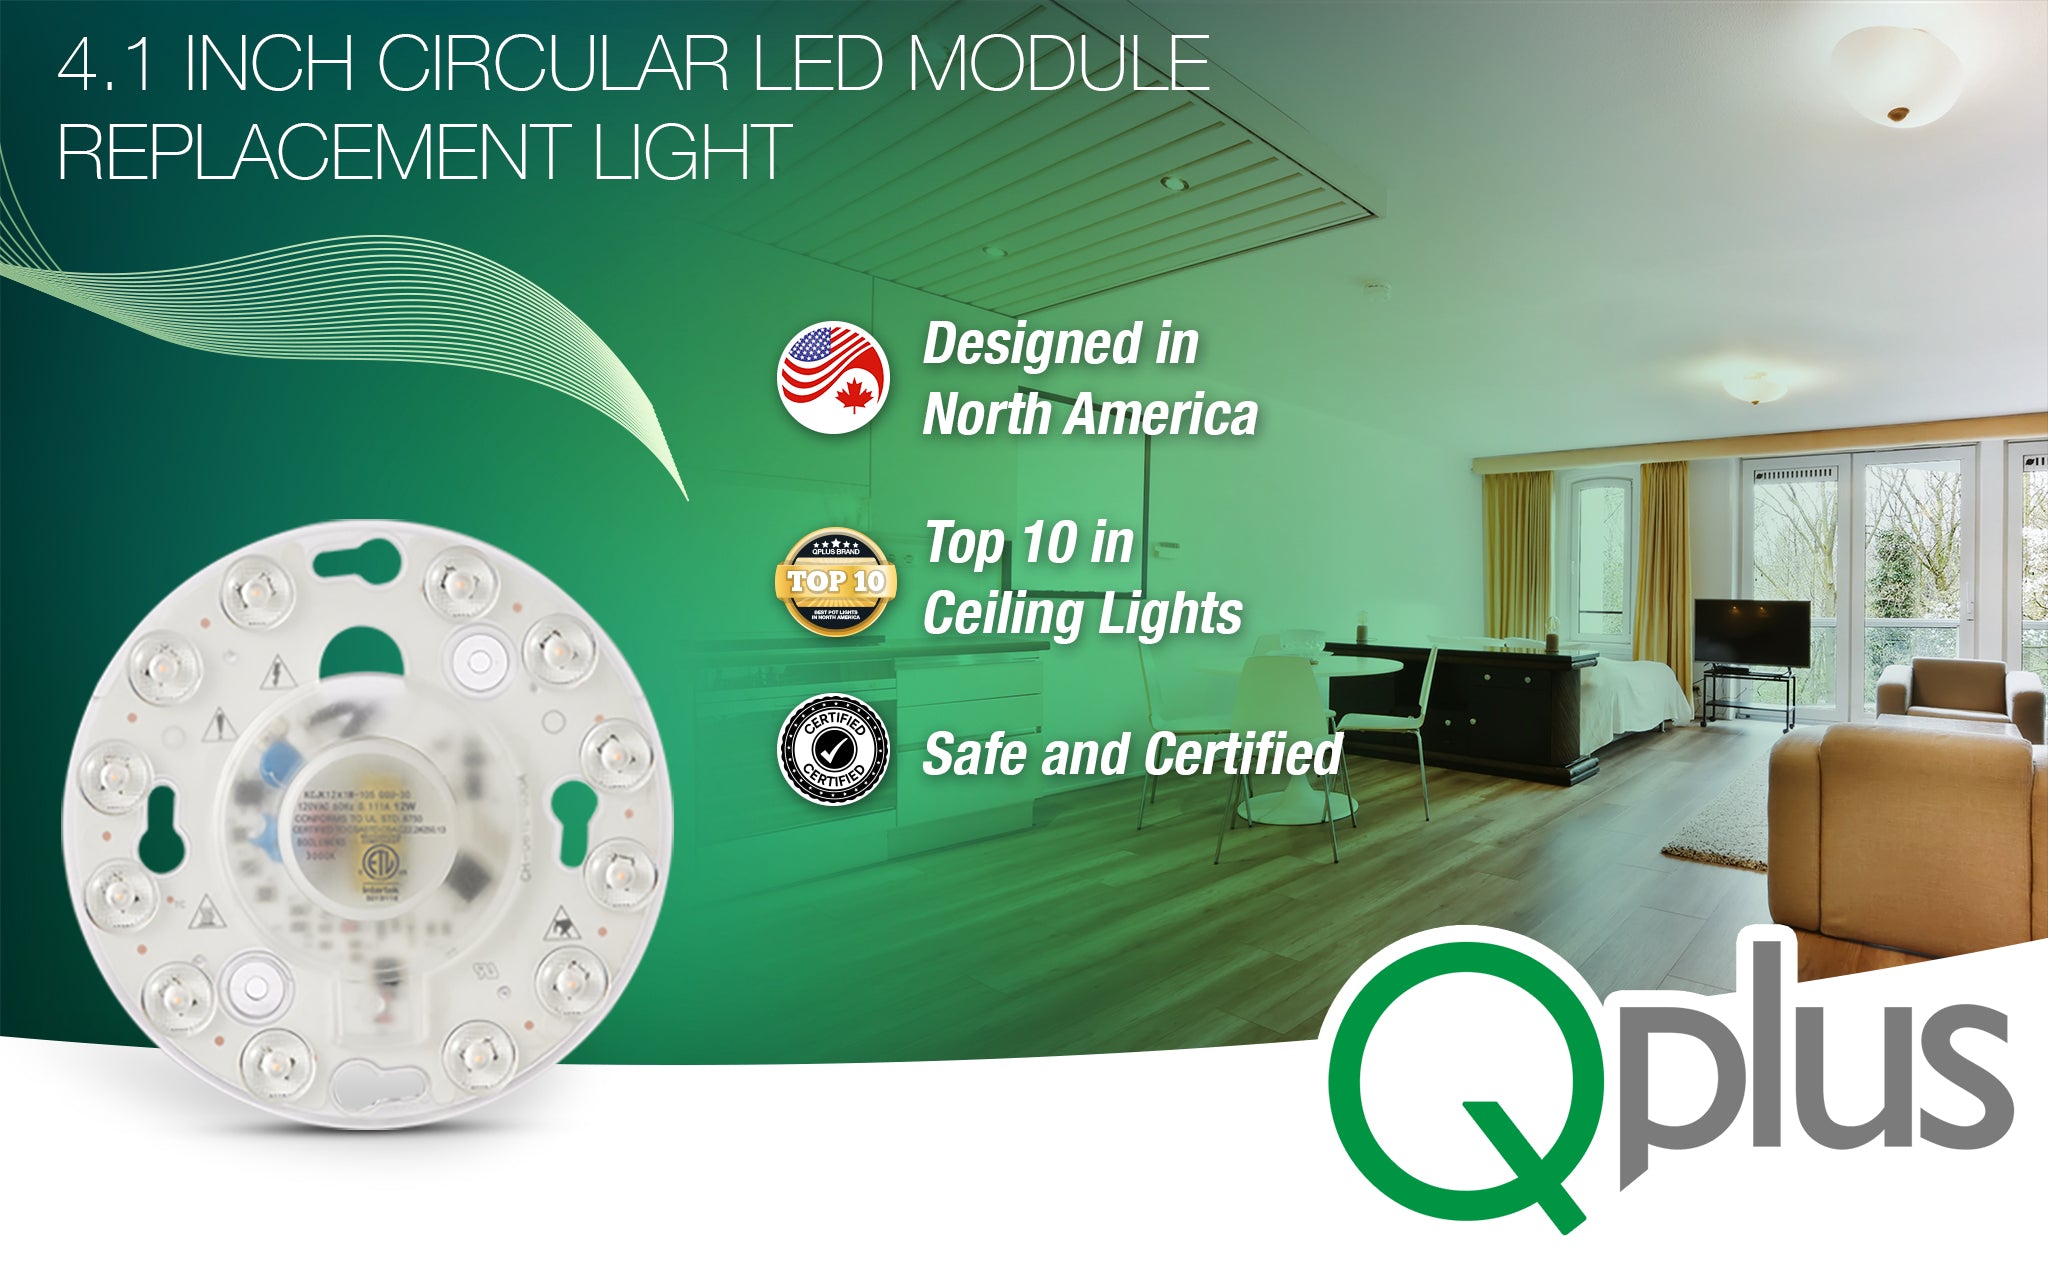 4.1 Inch Circular LED Module Replacement Light